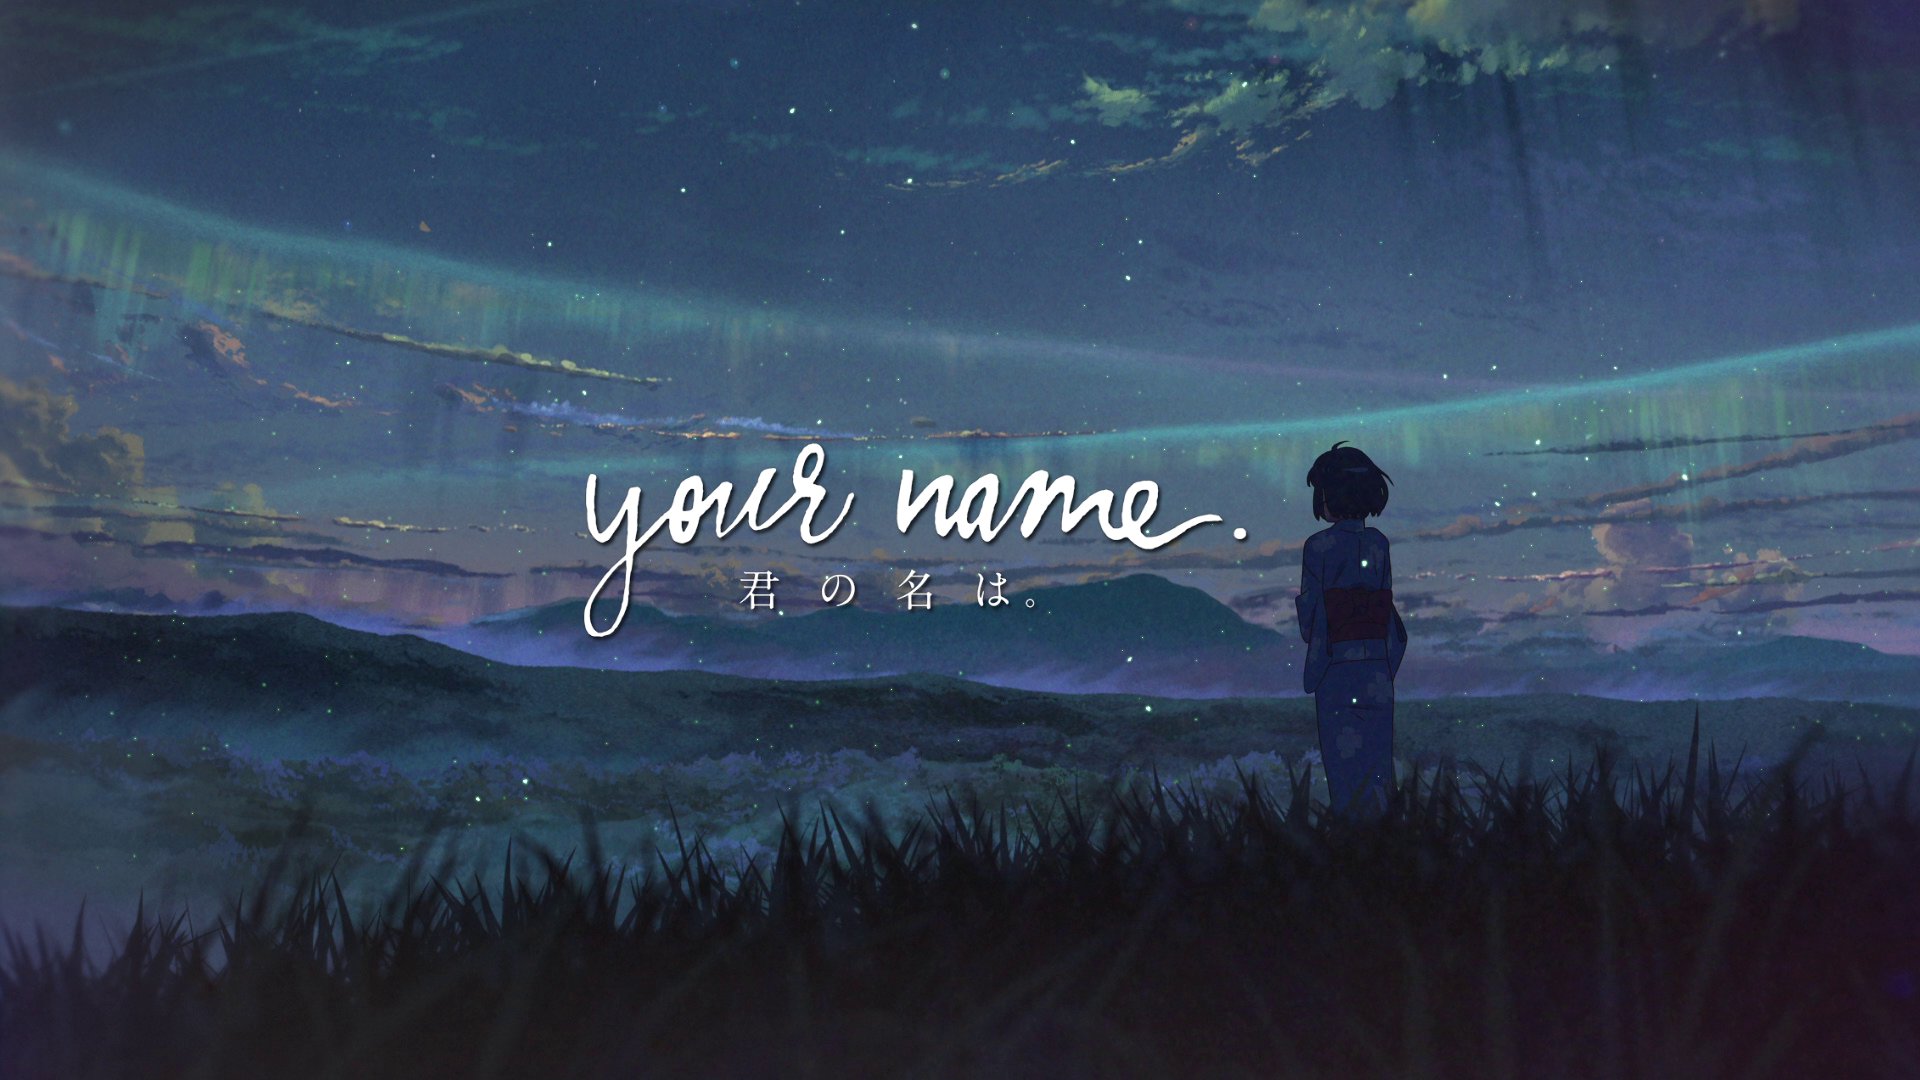 Your Name Wallpaper / Your Name Beautiful Sky Meteor Anime 1125x2436 Iphone 11 Pro Xs X Wallpaper Background Picture Image - See more of your name wallpaper on facebook.